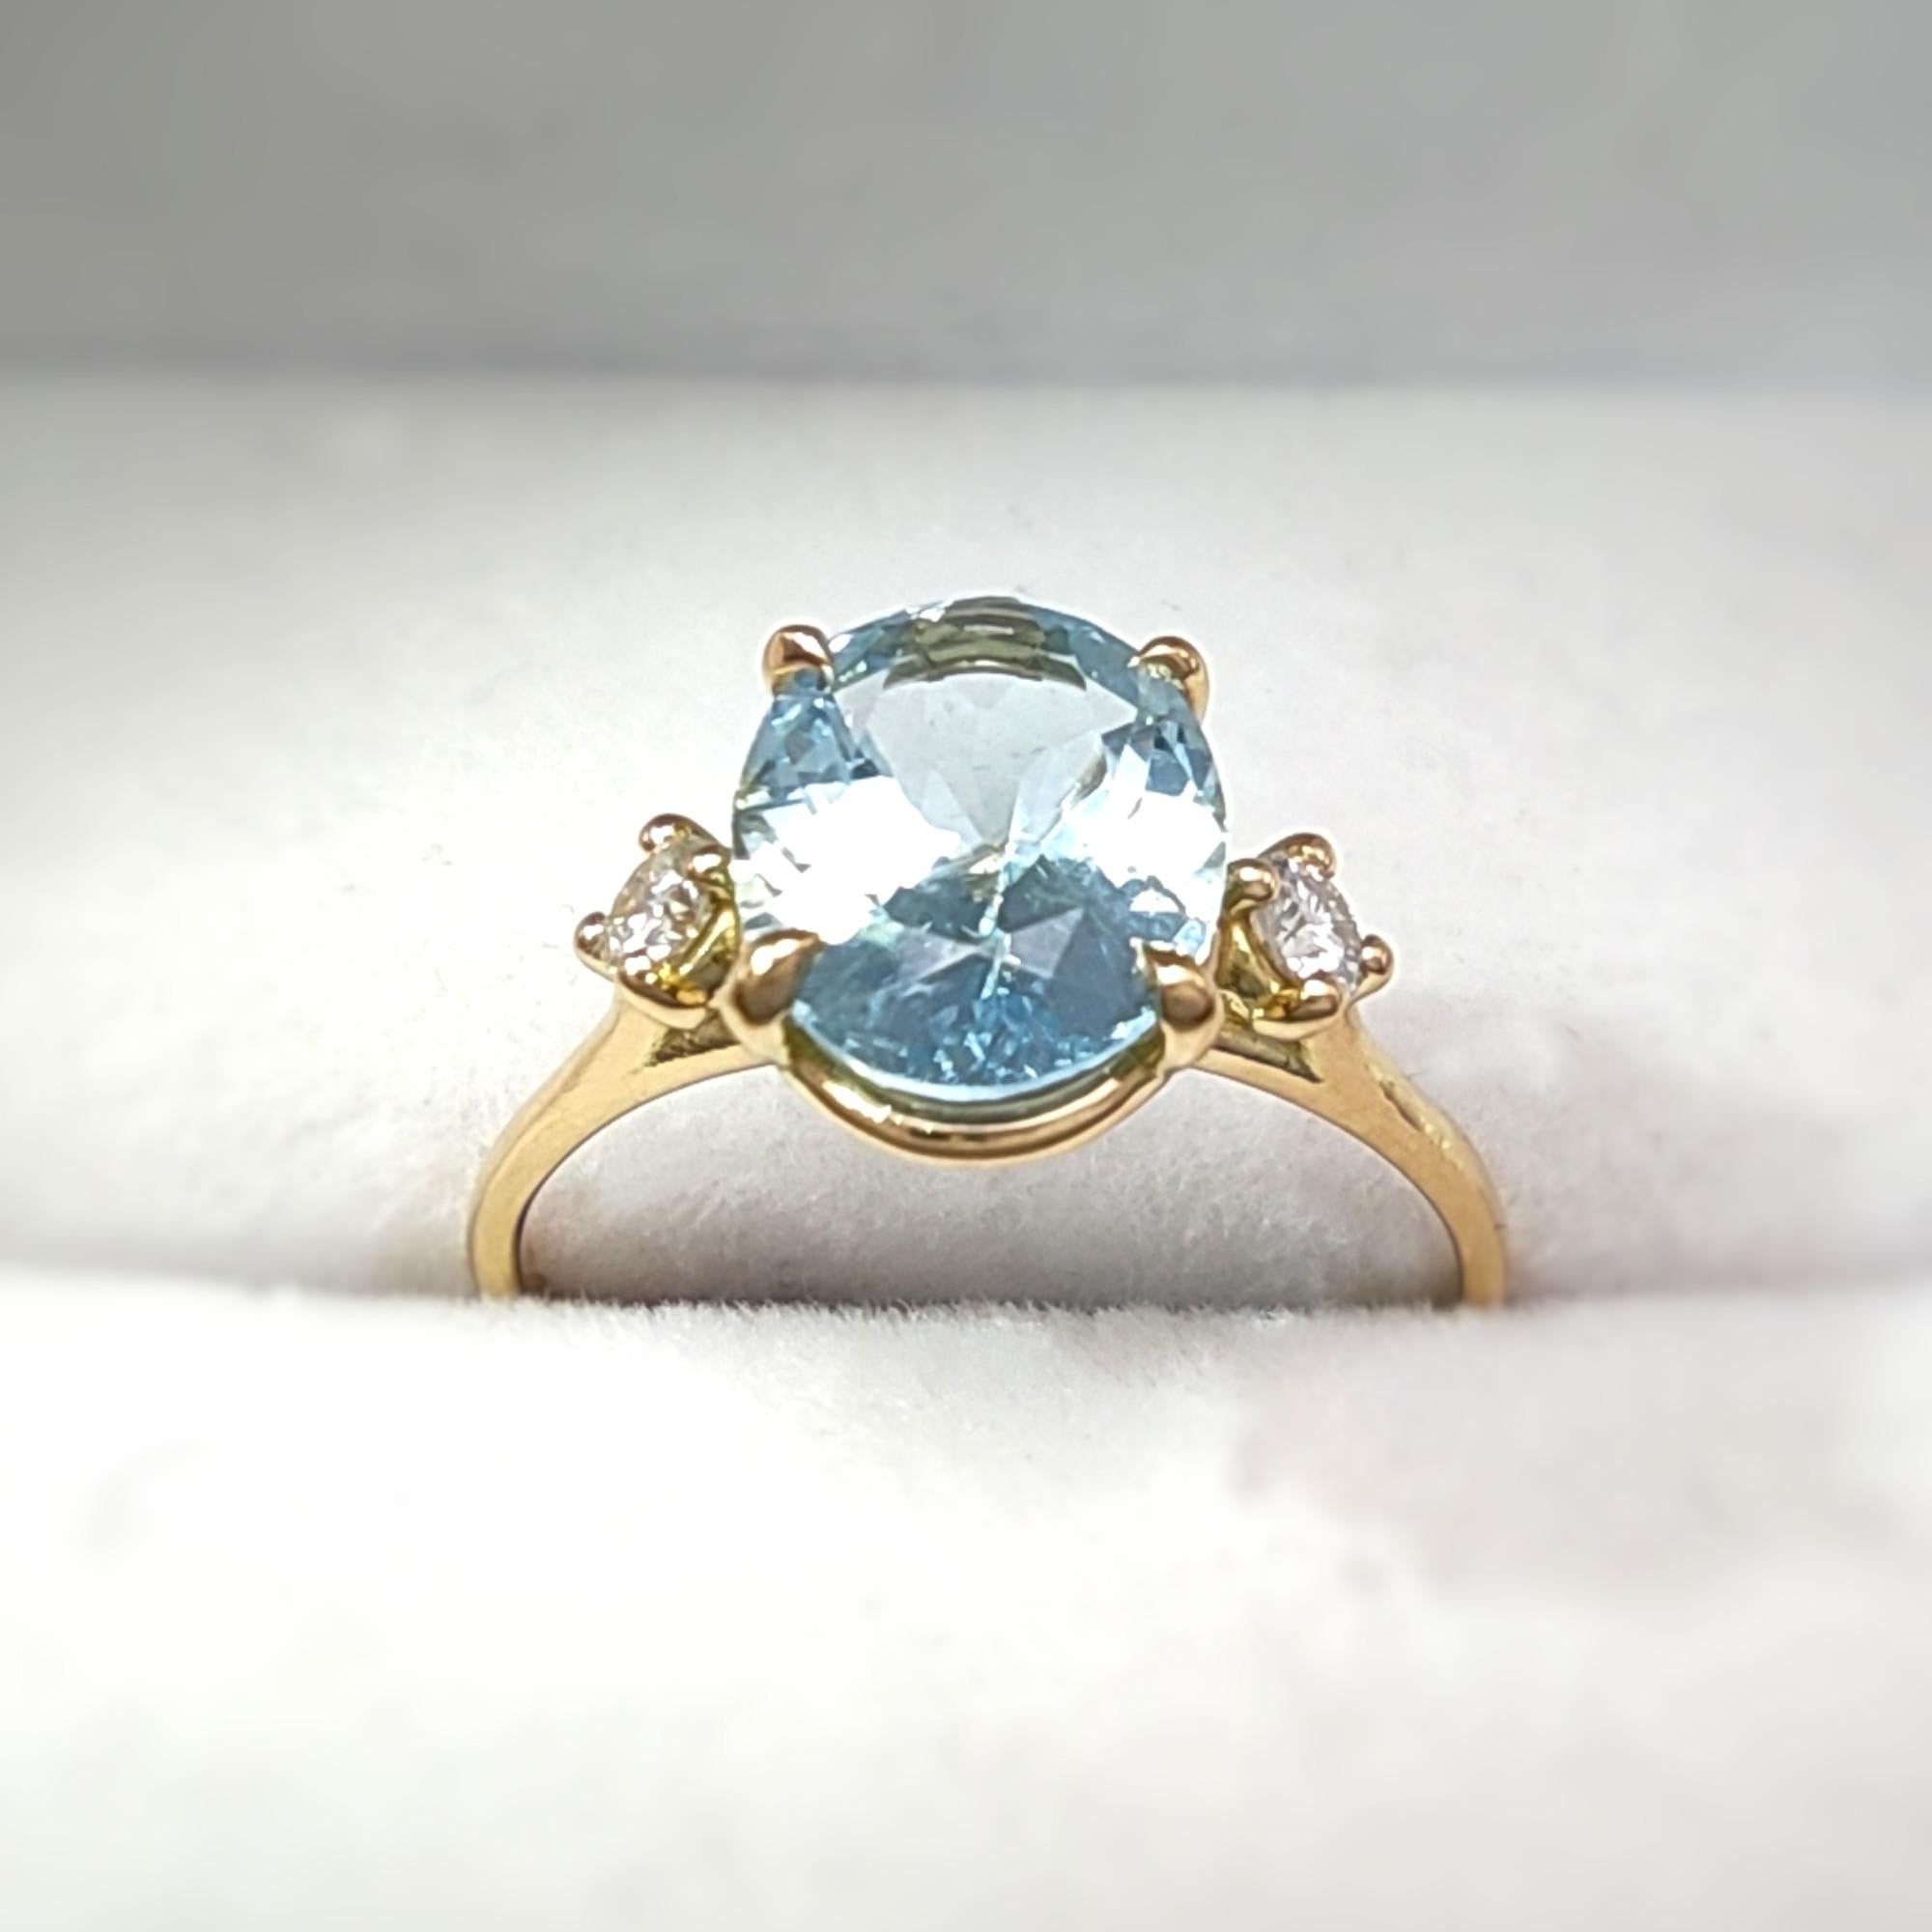 Oval Cut 1.6ct Aquamarine & 0.13ct Diamonds in 18K Gold - Luxury Women's Ring For Sale